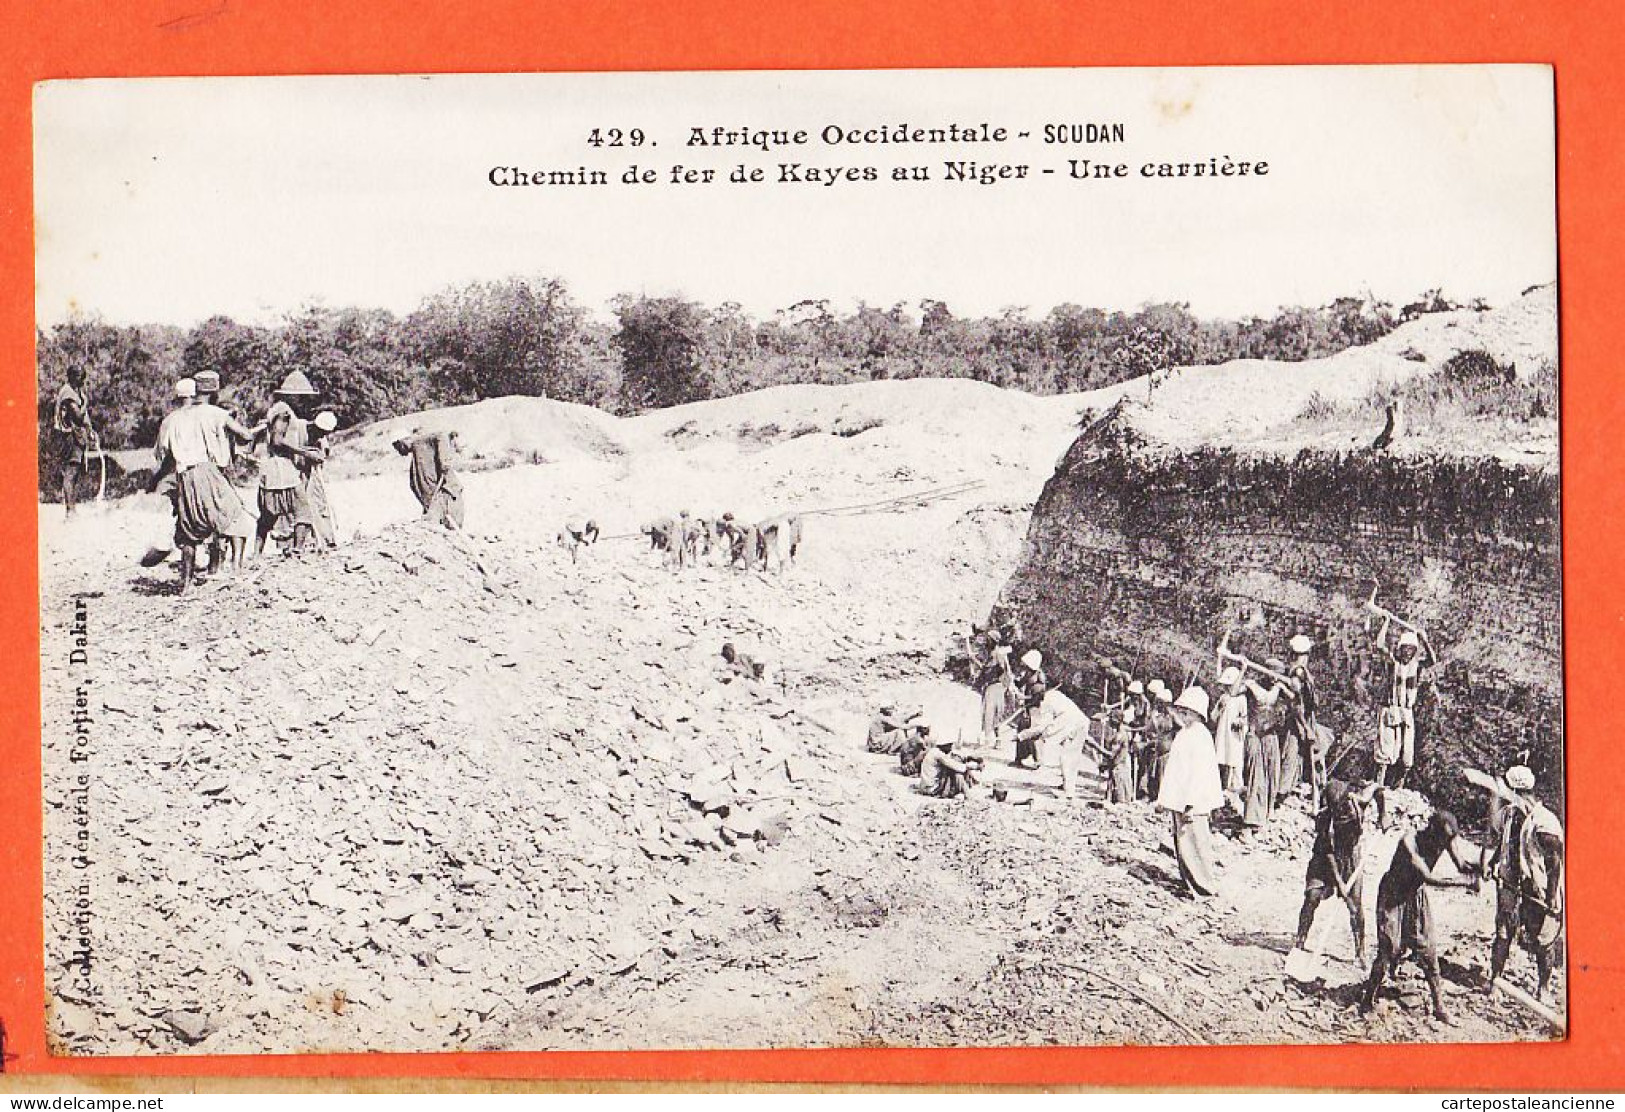 32995 / ⭐ (•◡•) Chemin Fer KAYES Au NIGER Soudan ◉ Une Carriere 1905s ◉ Collection Generale FORTIER 429 Dakar A.O.F - Sudán